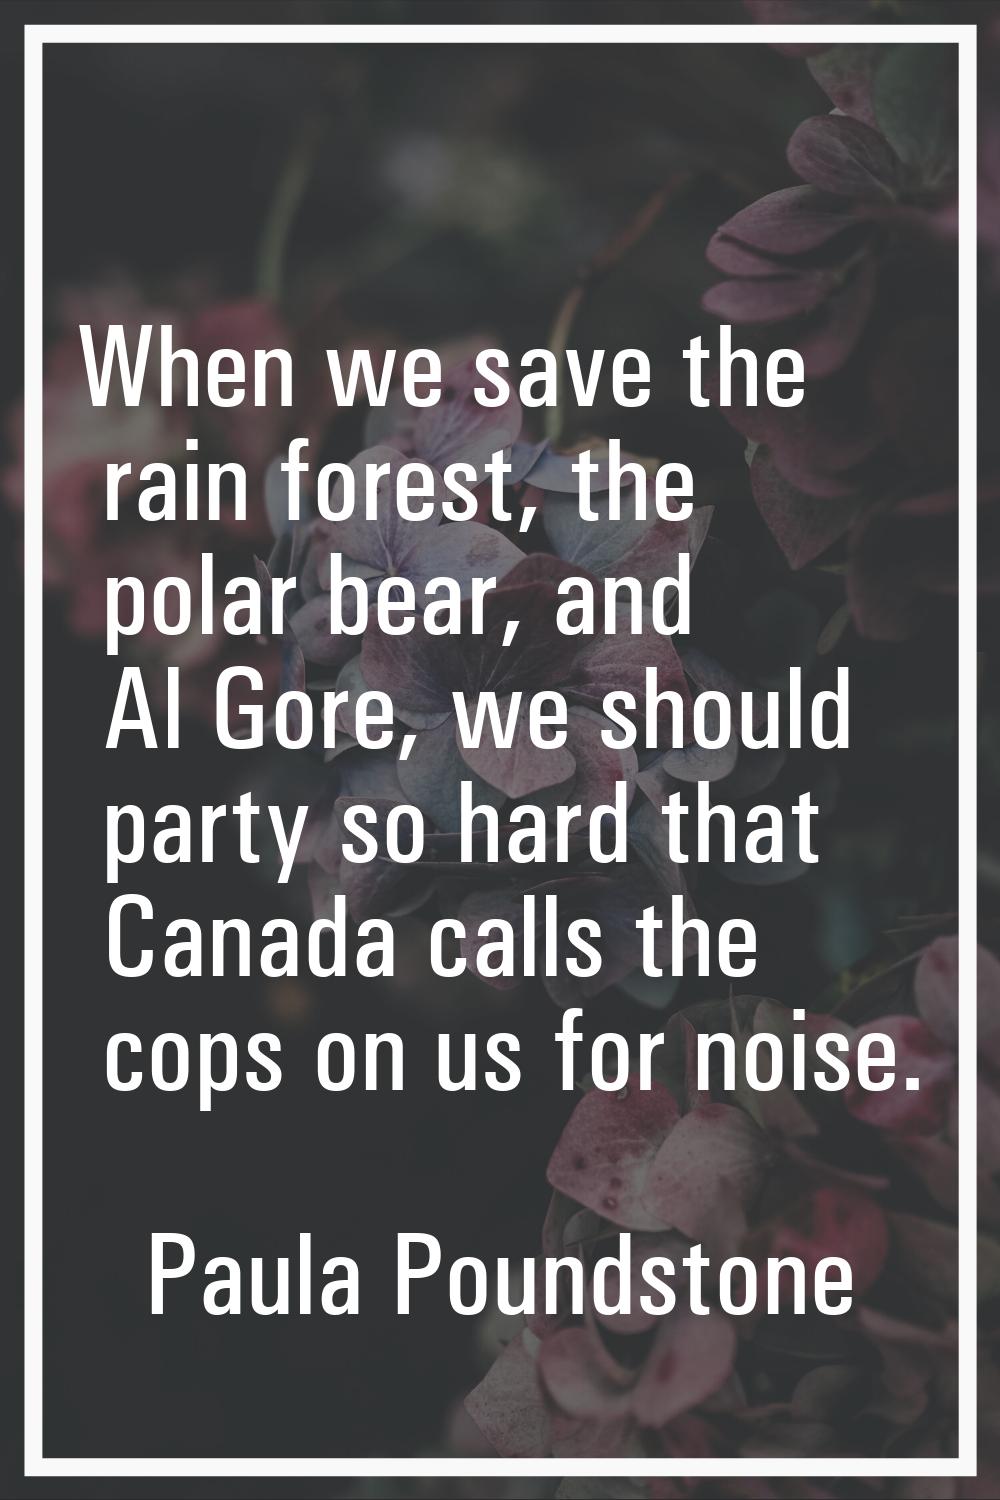 When we save the rain forest, the polar bear, and Al Gore, we should party so hard that Canada call